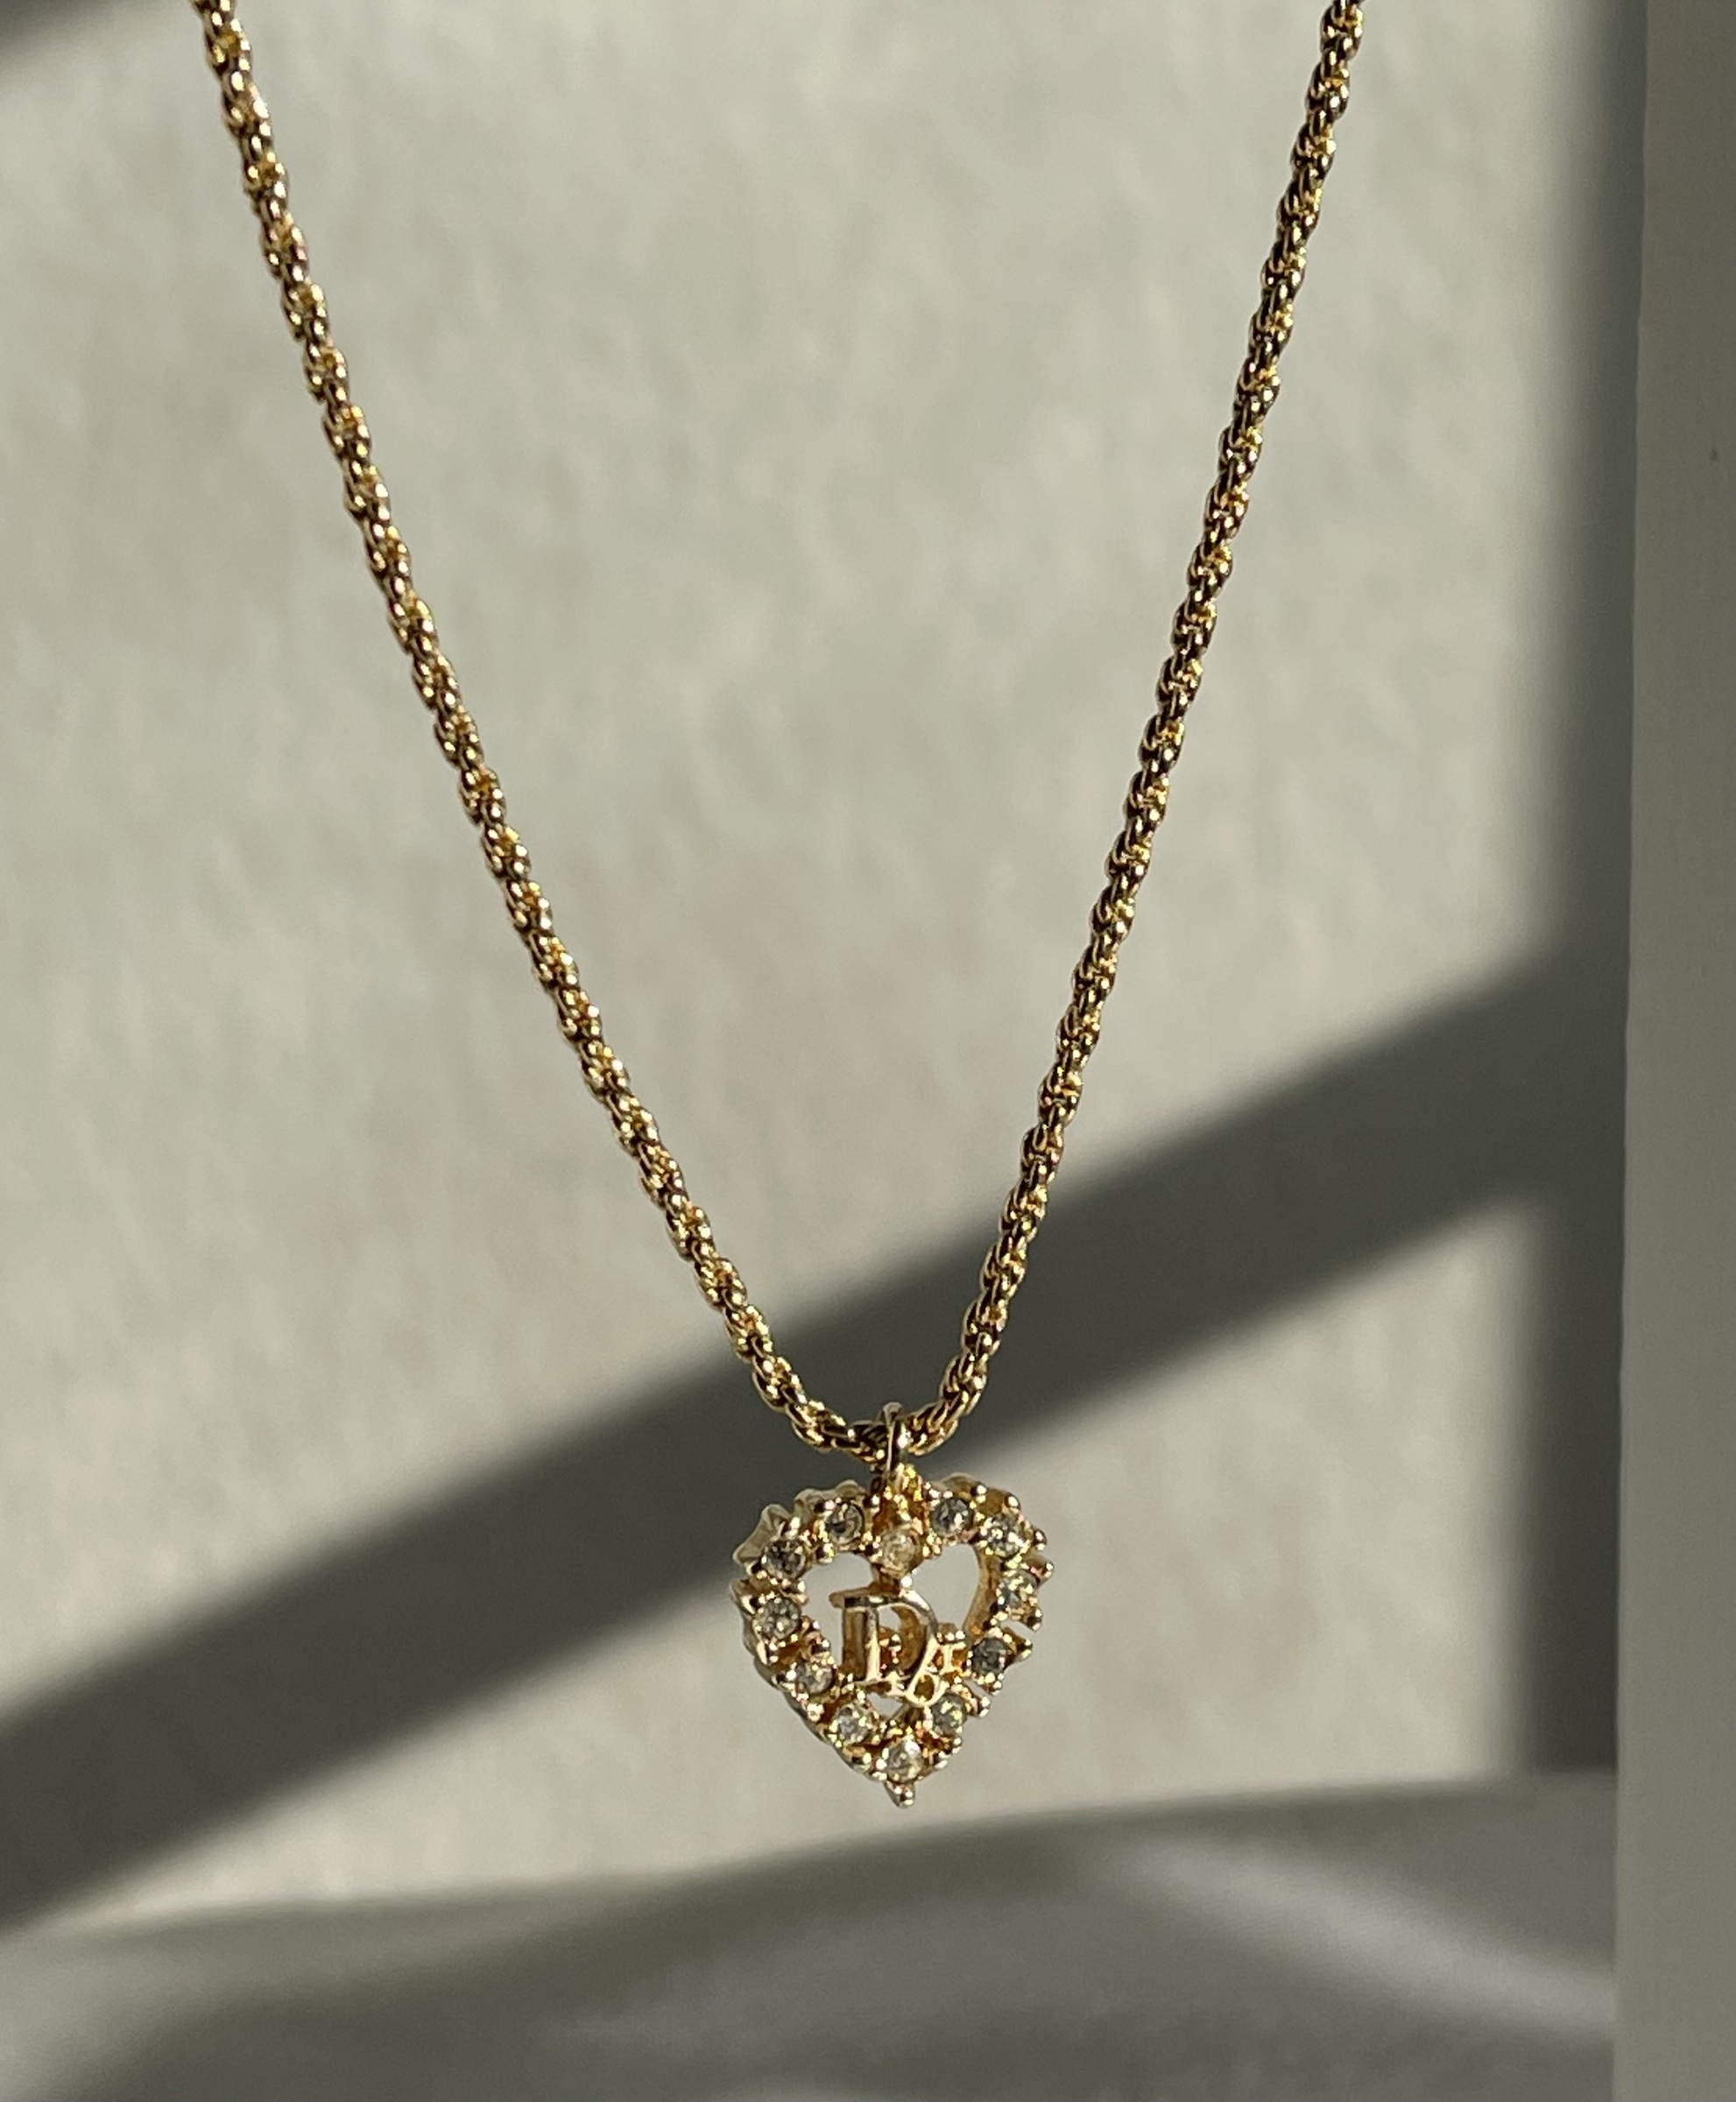 3 Heart Rhinestone Necklace – Song Lily